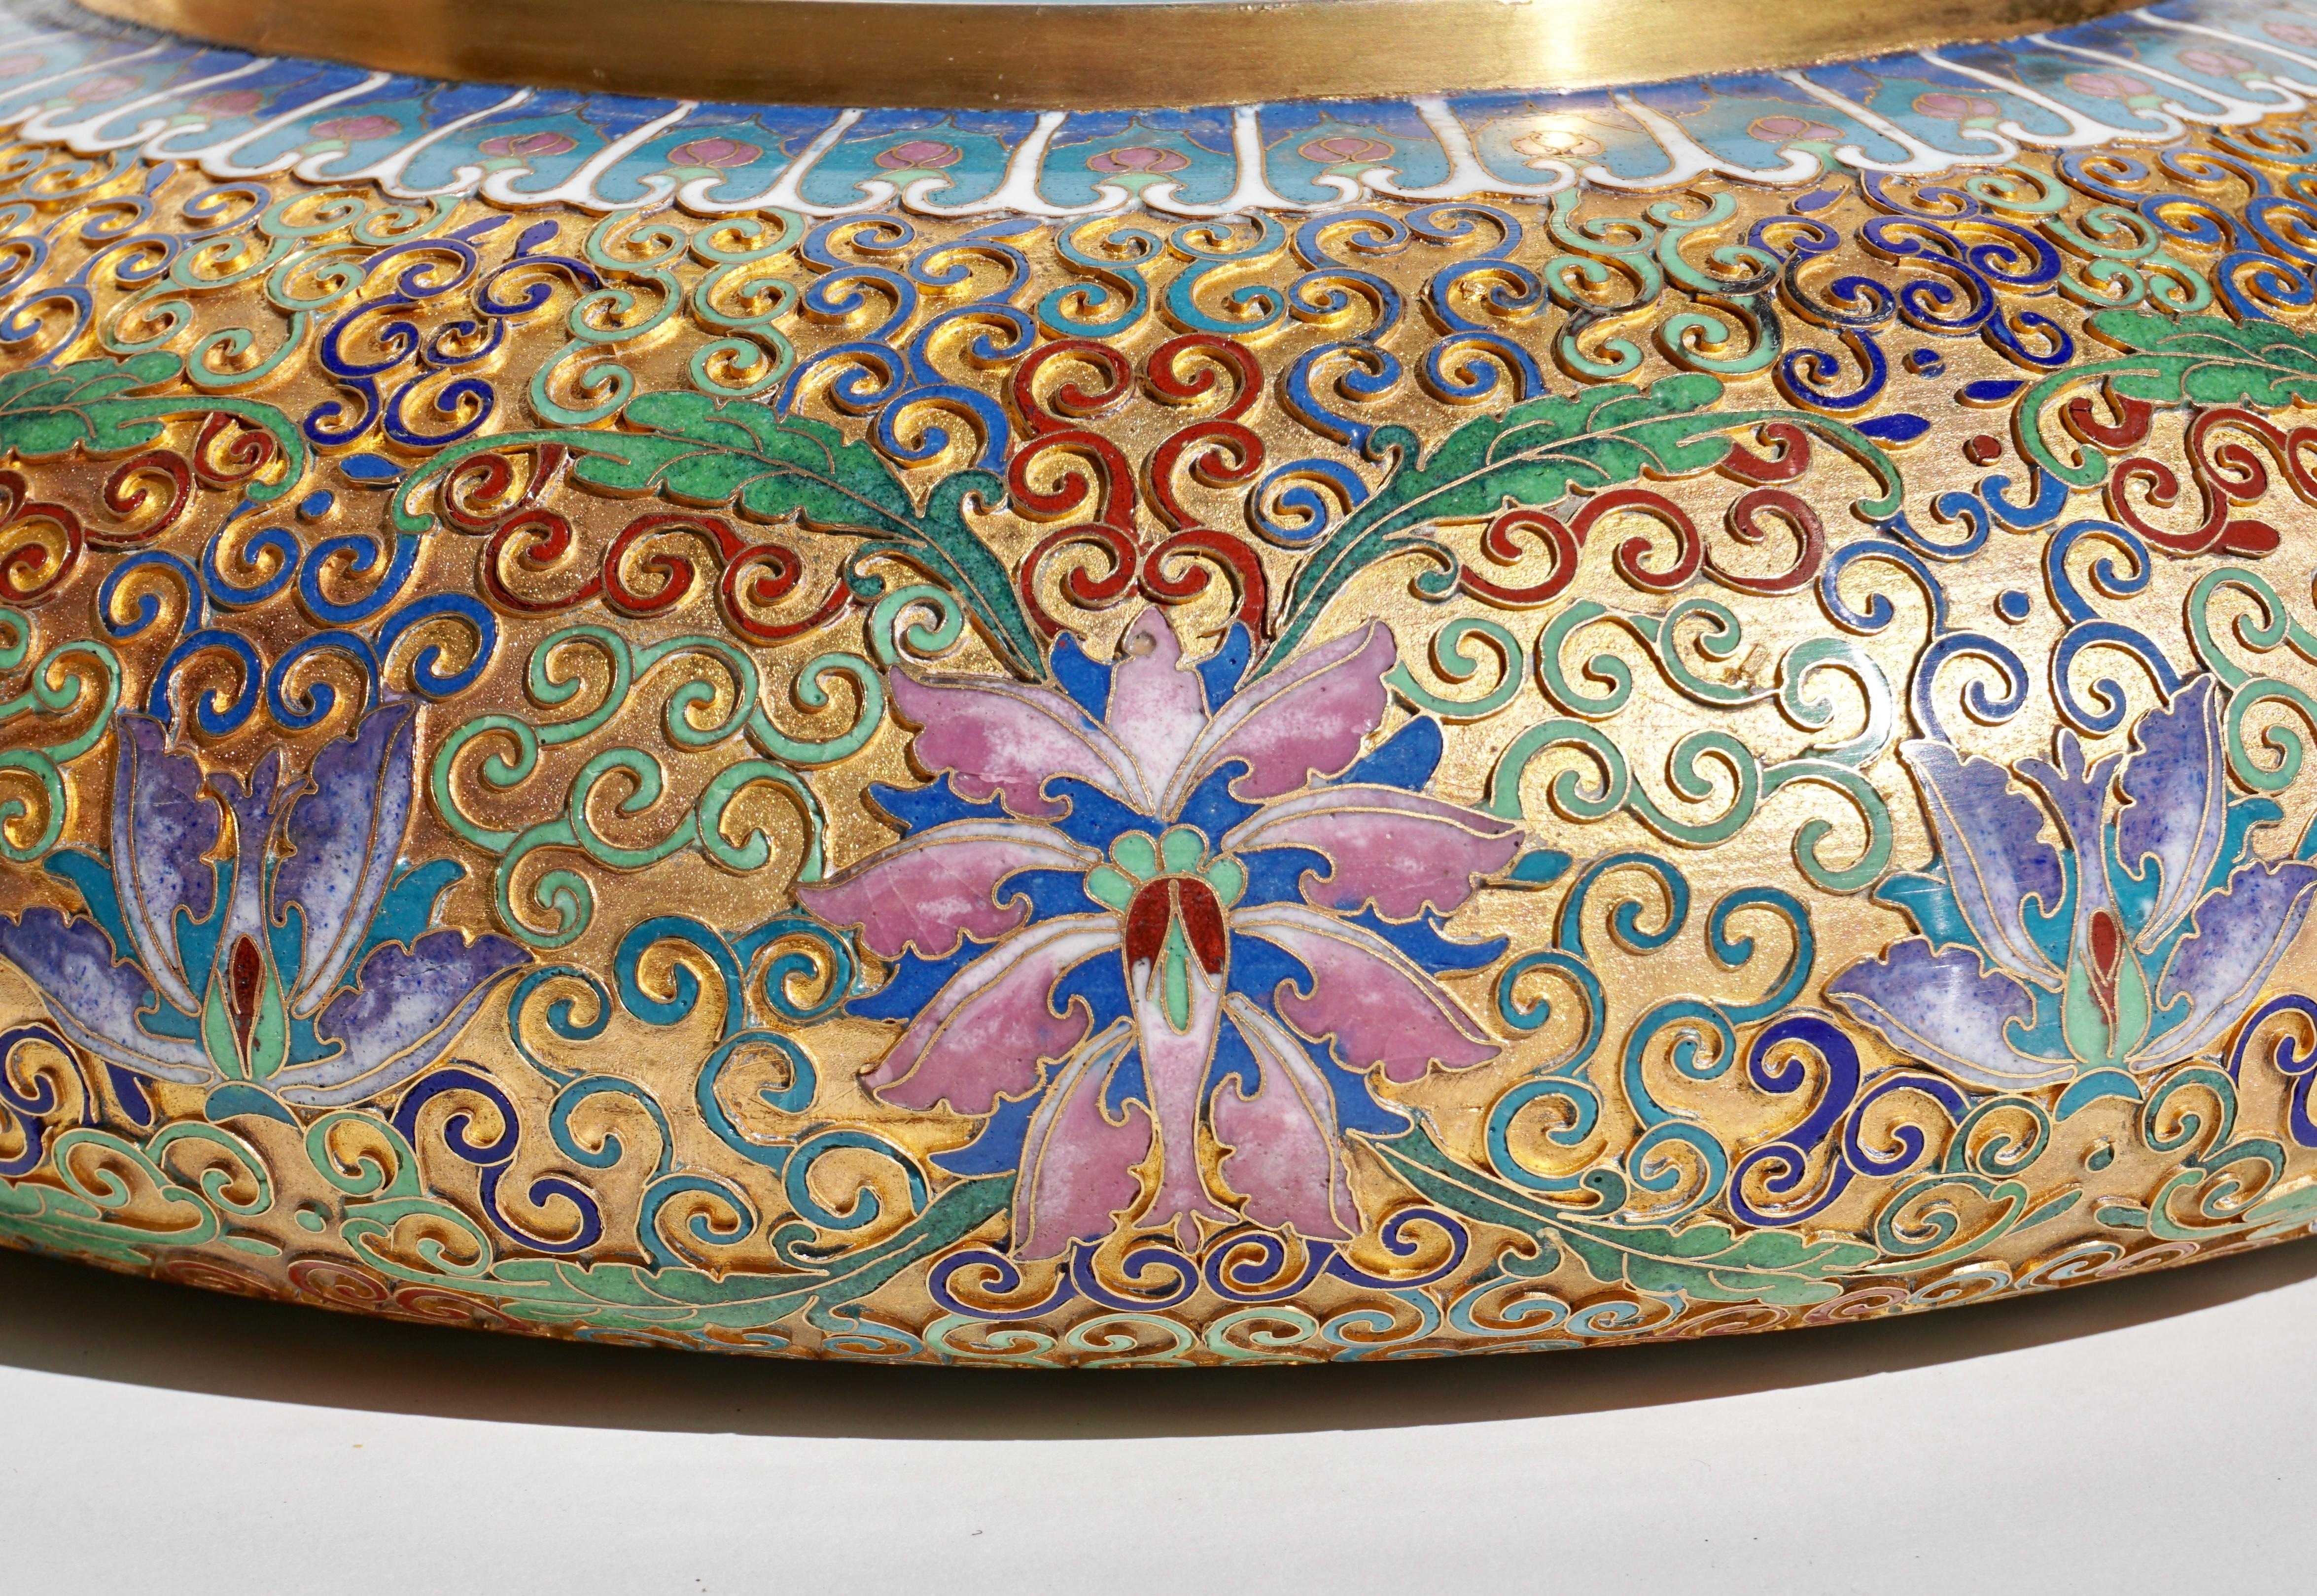 A Chinese cloisonné enamel alms bowl. With intricately detailed decoration. Interior decorated with chrysanthemums. A stunning and intricate piece of metalwork. Would make a wonderful centerpiece or planter.
20th century.

Measures: Height 4.5